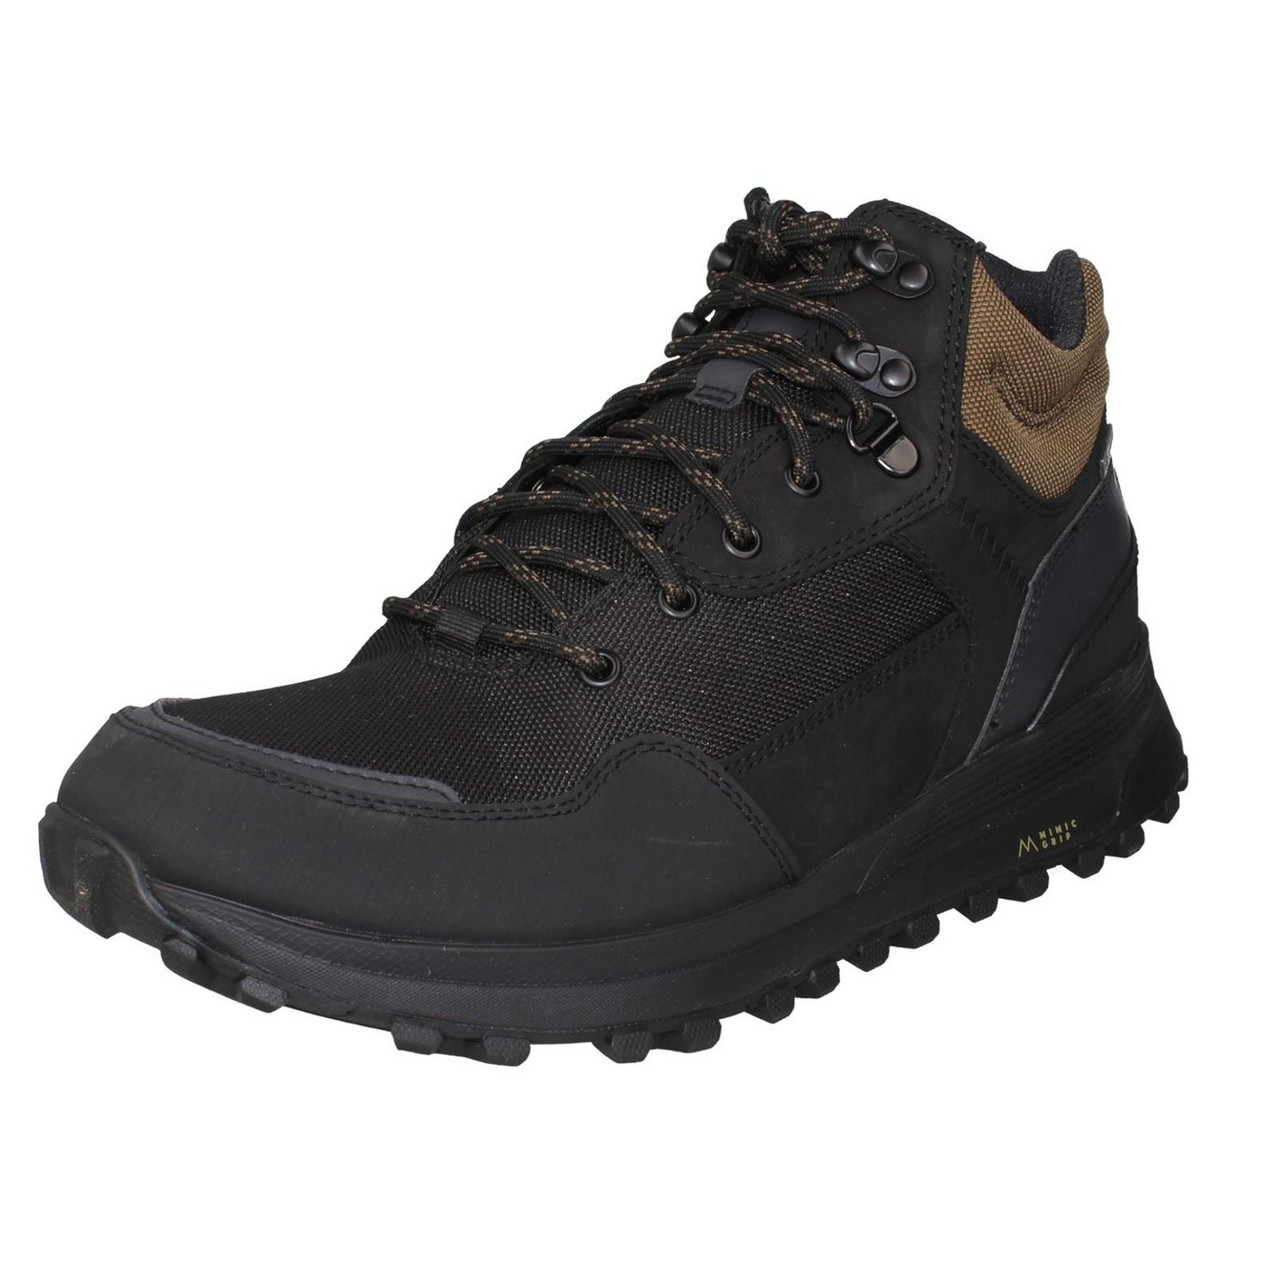 Mens Boots | Chelsea, Chukka, Desert and Hiking Boots | BluntsShoes.com